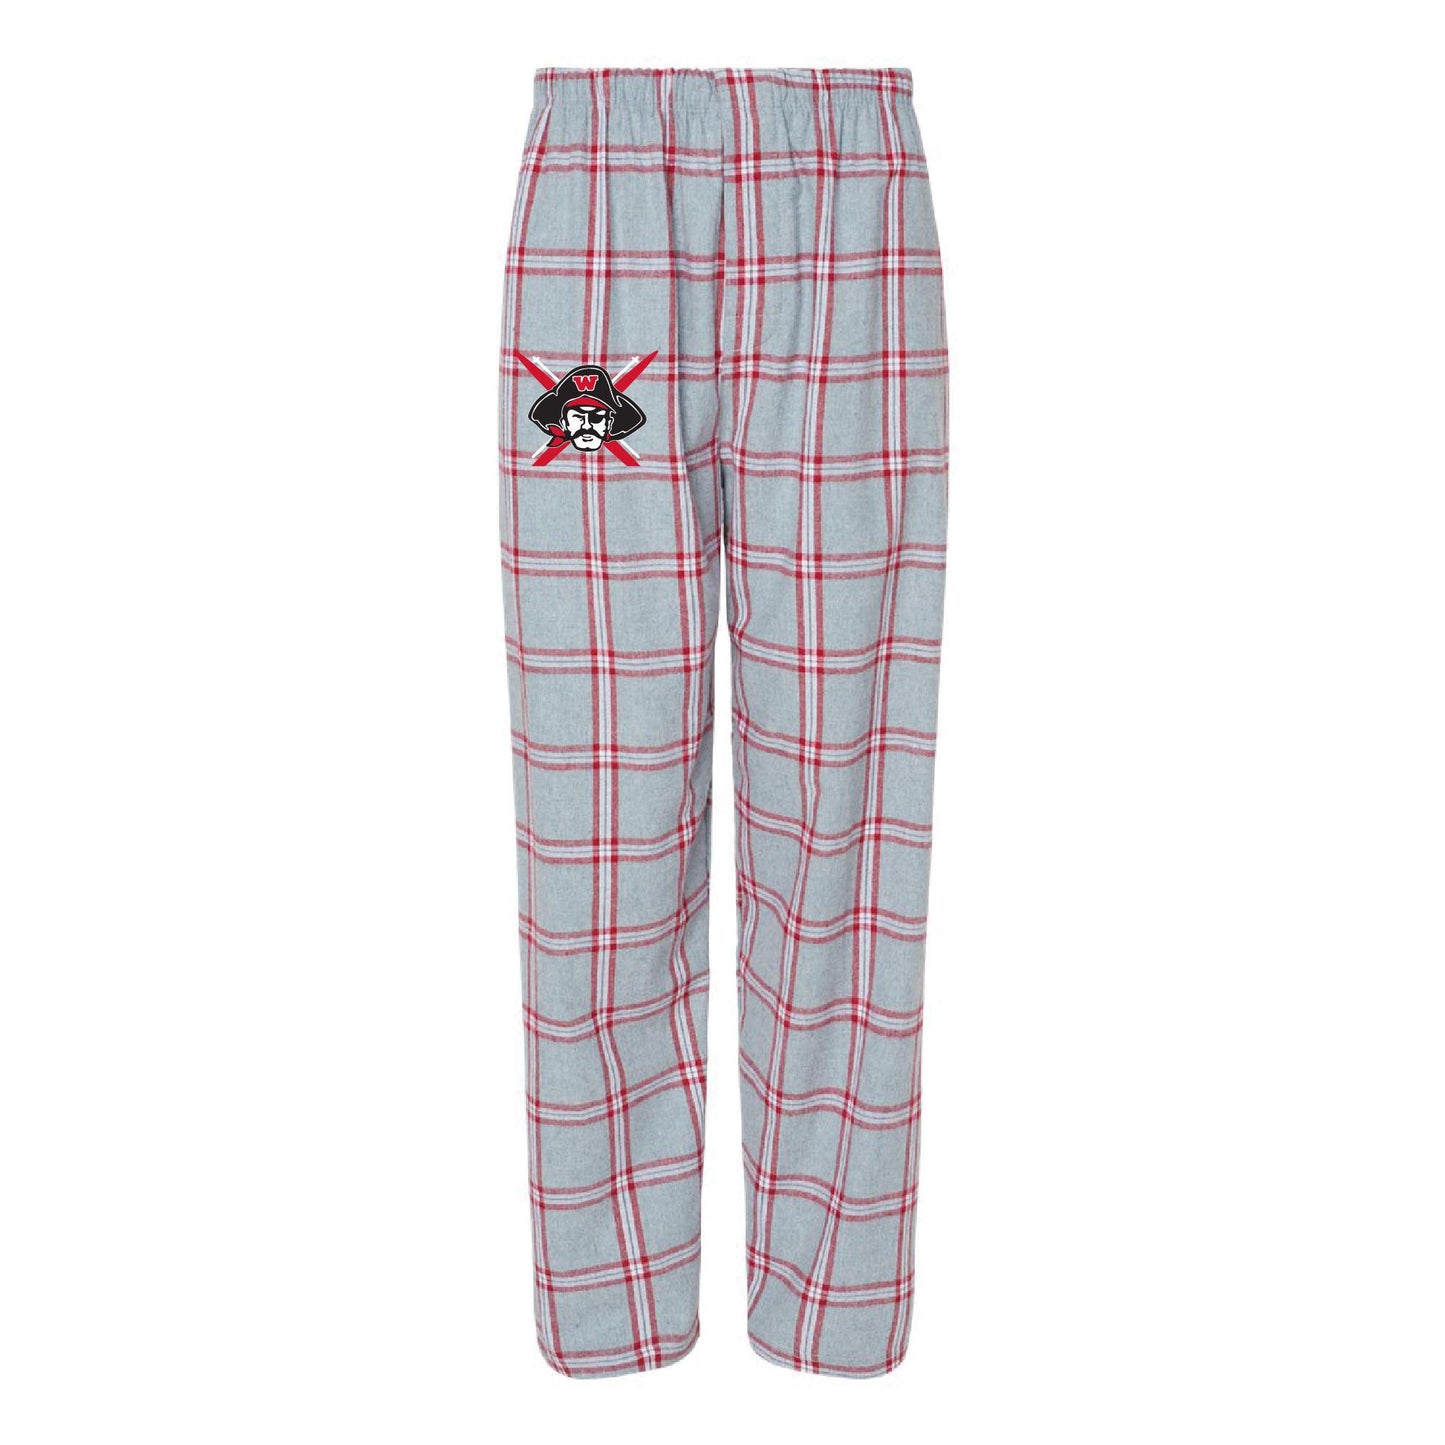 WHS Nordic Ski Flannel Lounge Pant in Gray Plaid